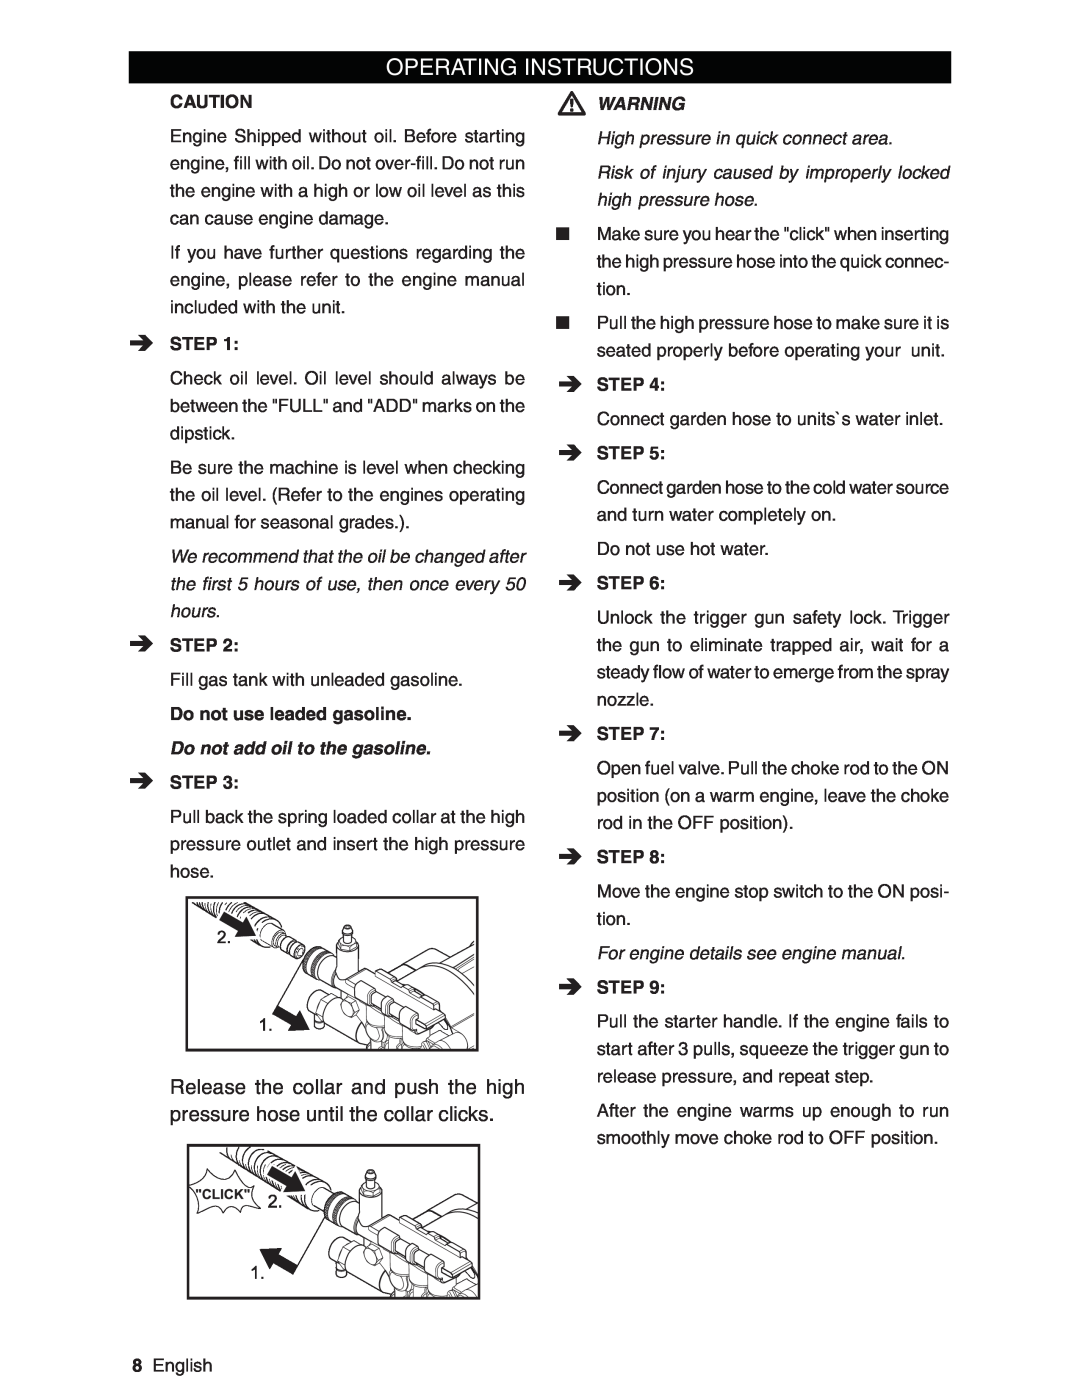 Karcher G2800XH, G2600XH manual Operating Instructions, Do not add oil to the gasoline 